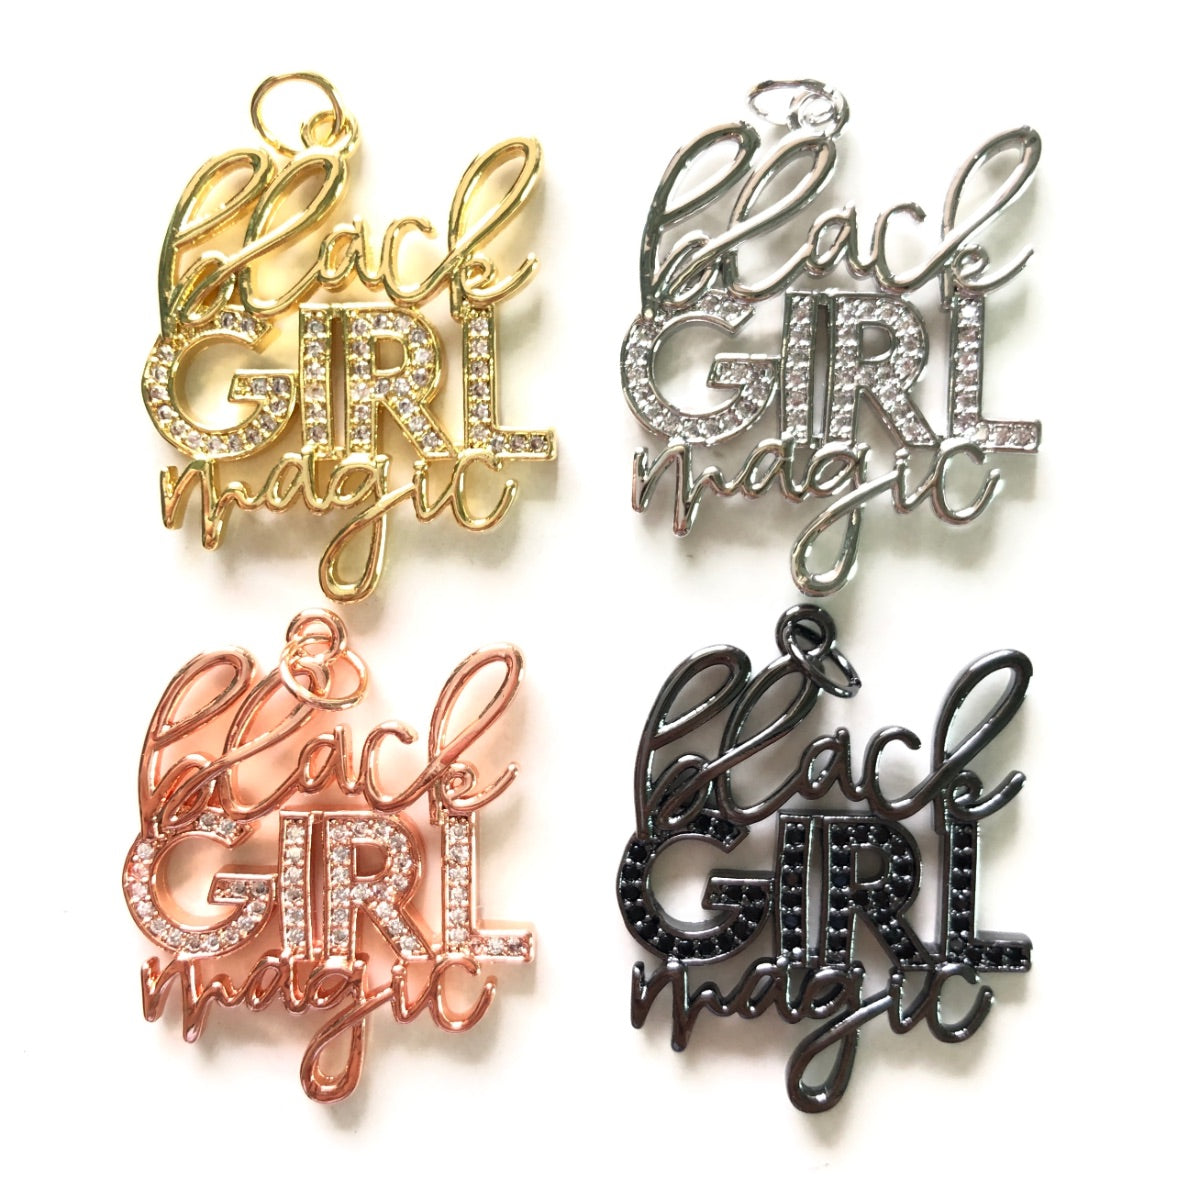 10pcs/lot CZ Paved Black Girl Magic Charms Mix Color CZ Paved Charms New Charms Arrivals Words & Quotes Charms Beads Beyond